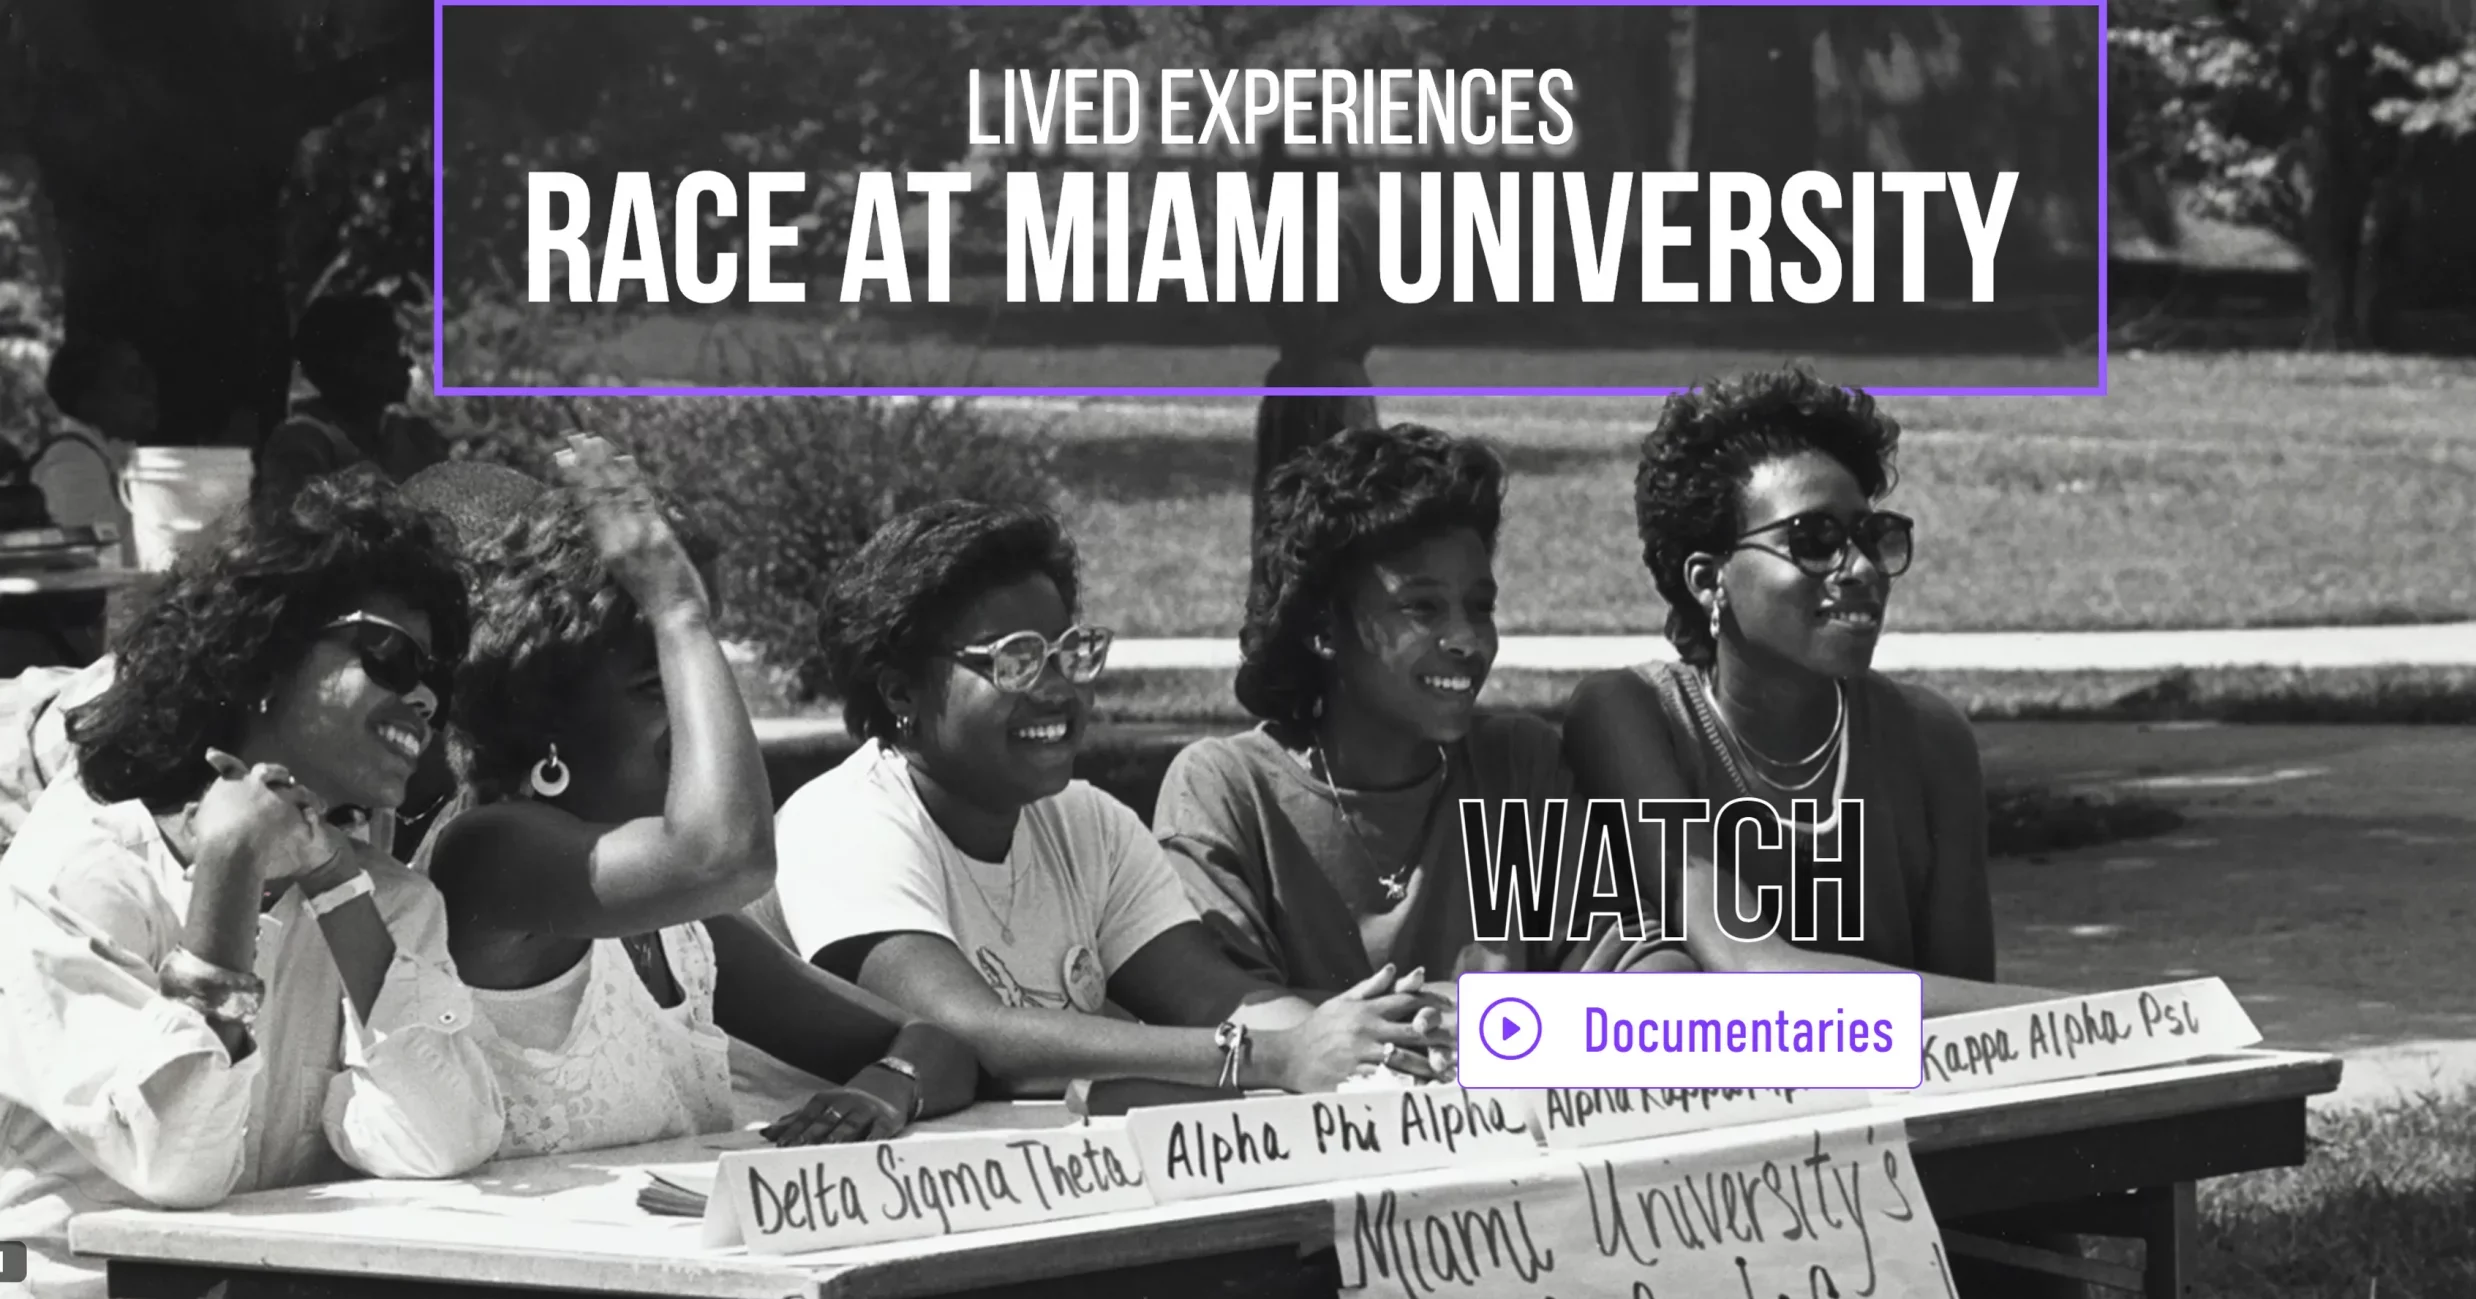 Lived Experiences: Race at Miami homepage featuring image of with members of a Black Sorority at a table seeking new members